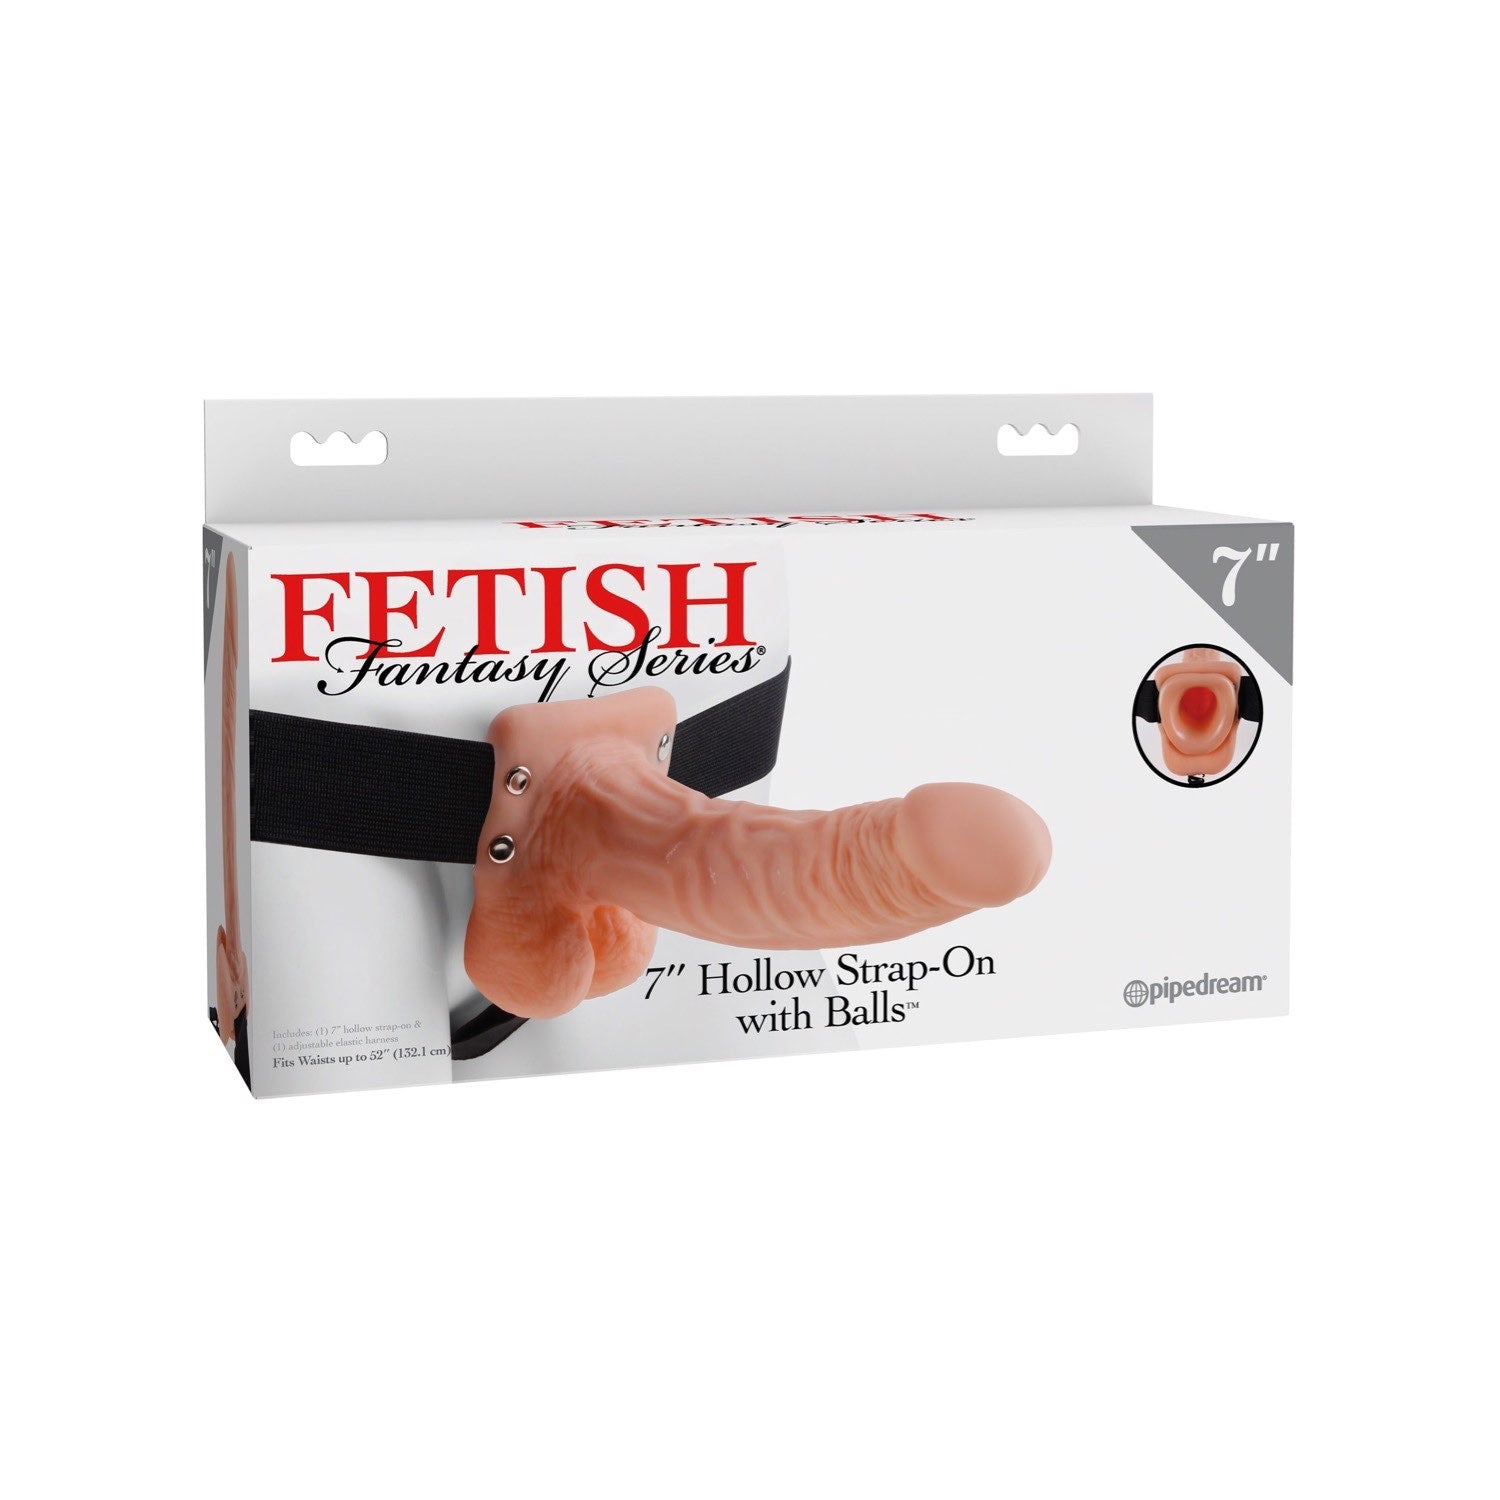 Fetish Fantasy Series 7&quot; Hollow Strap-On With Balls - Flesh 17.8 cm (7&quot;) Hollow Strap-On by Pipedream